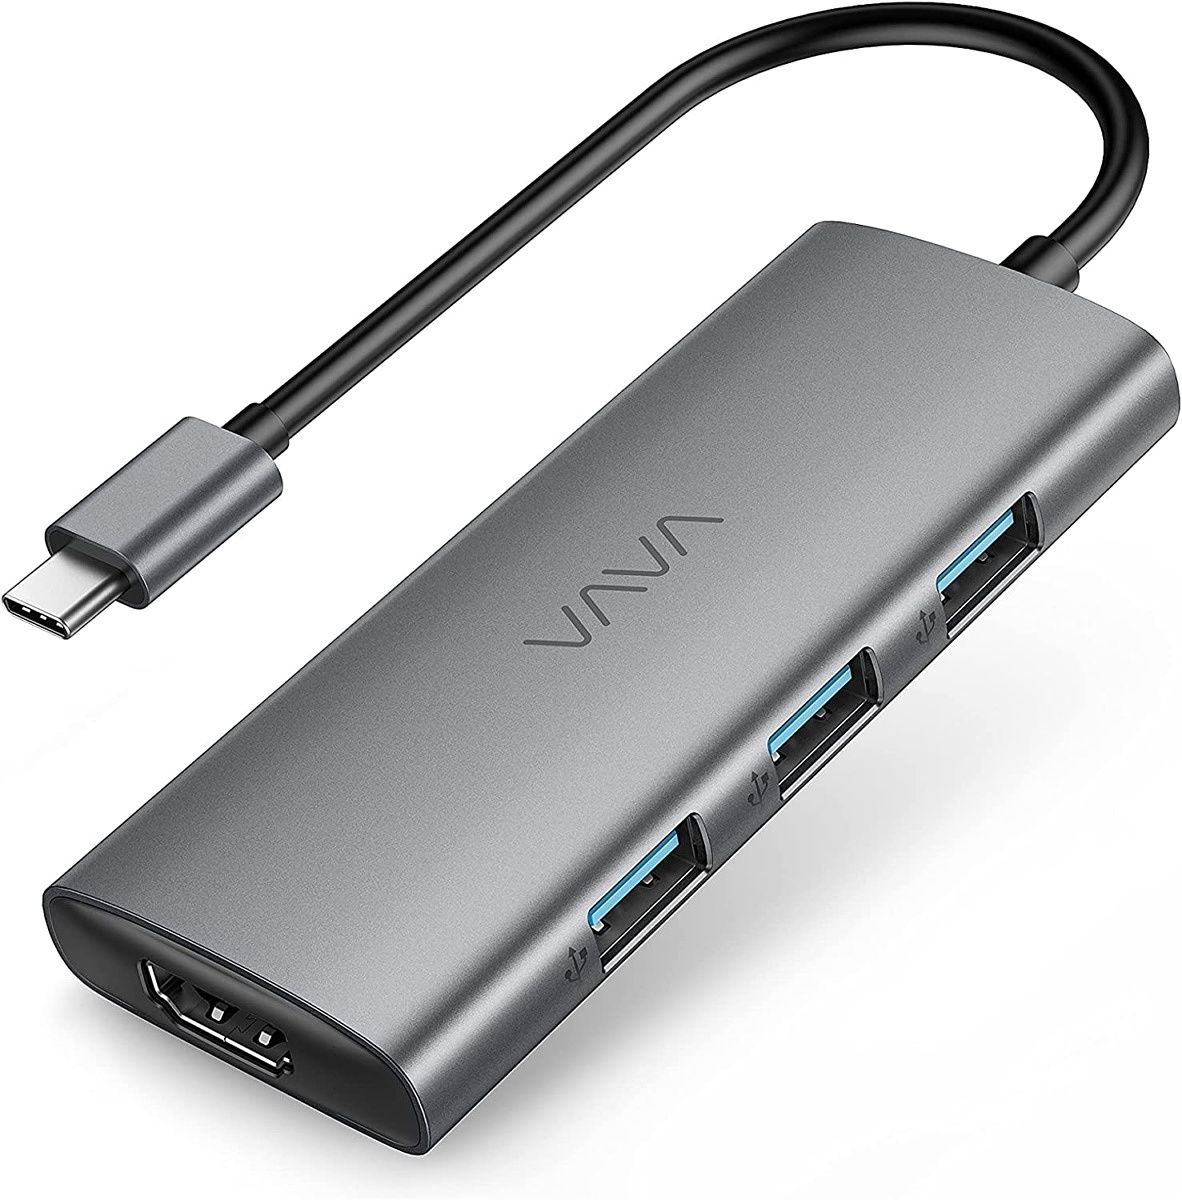 Thunderbolt docks are great for the office, but when traveling, you may just want a compact hub that gives you a few extra ports. This VAVA USB-C hub includes three USB 3.0 ports, HDMI, and power delivery in a compact package.